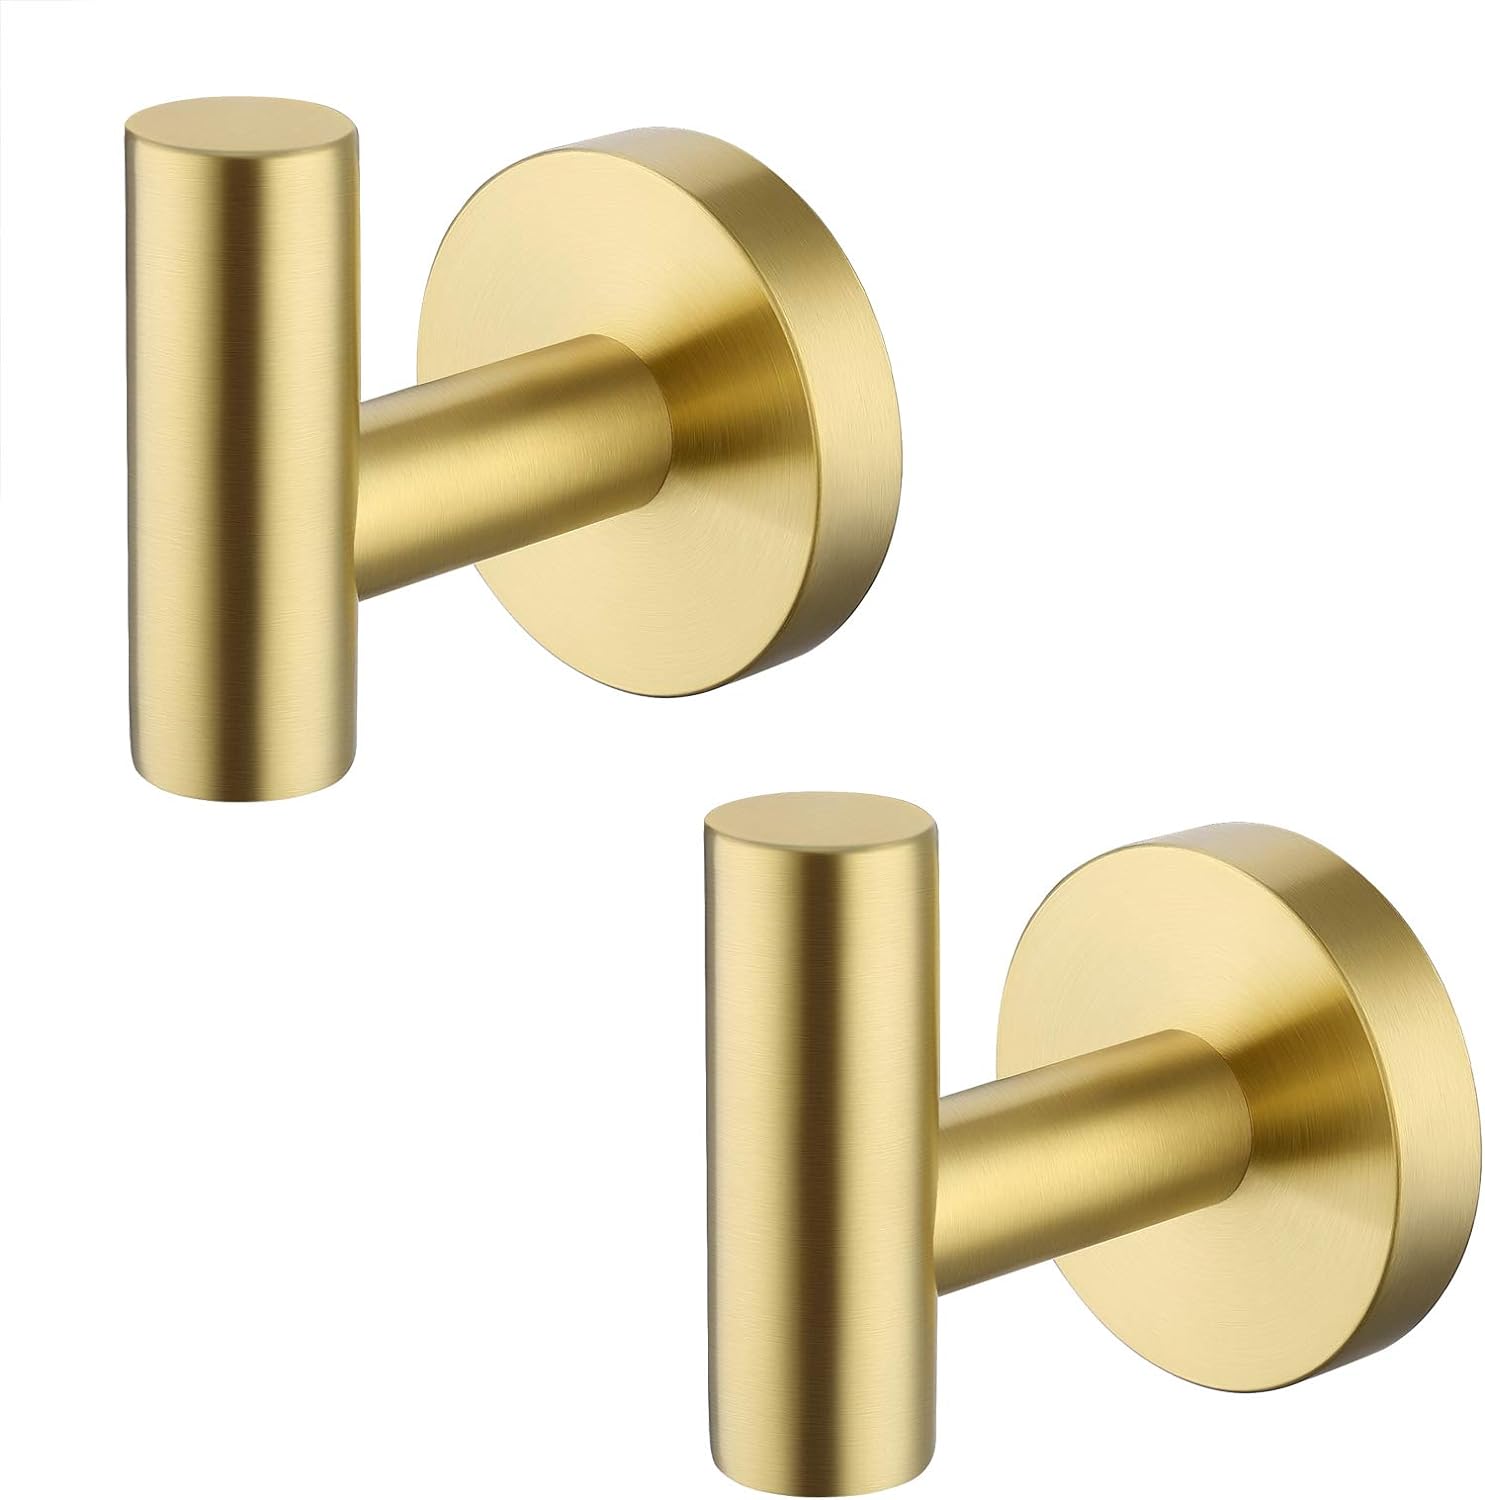 Bath Towel Hook Robe Hook for Bathroom Kitchen Wall Mount SUS 304 Stainless Steel Brushed Gold 2 Pack, A2164-BZ-P2